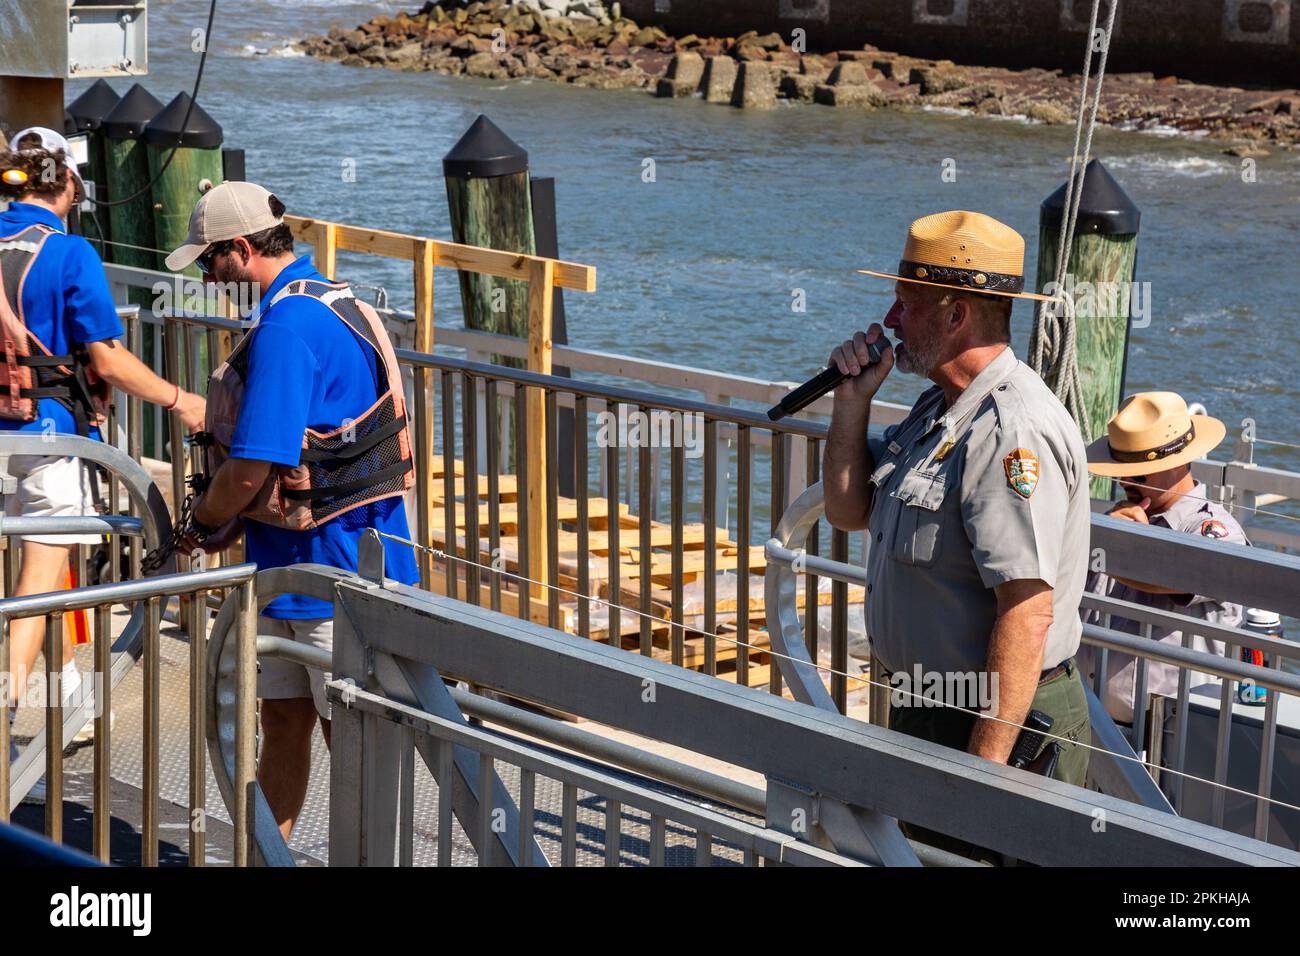 The ferry crew secures the boat while a park ranger welcomes visitors to the Fort Sumter National Monument in Charleston, South Carolina, USA Stock Photo